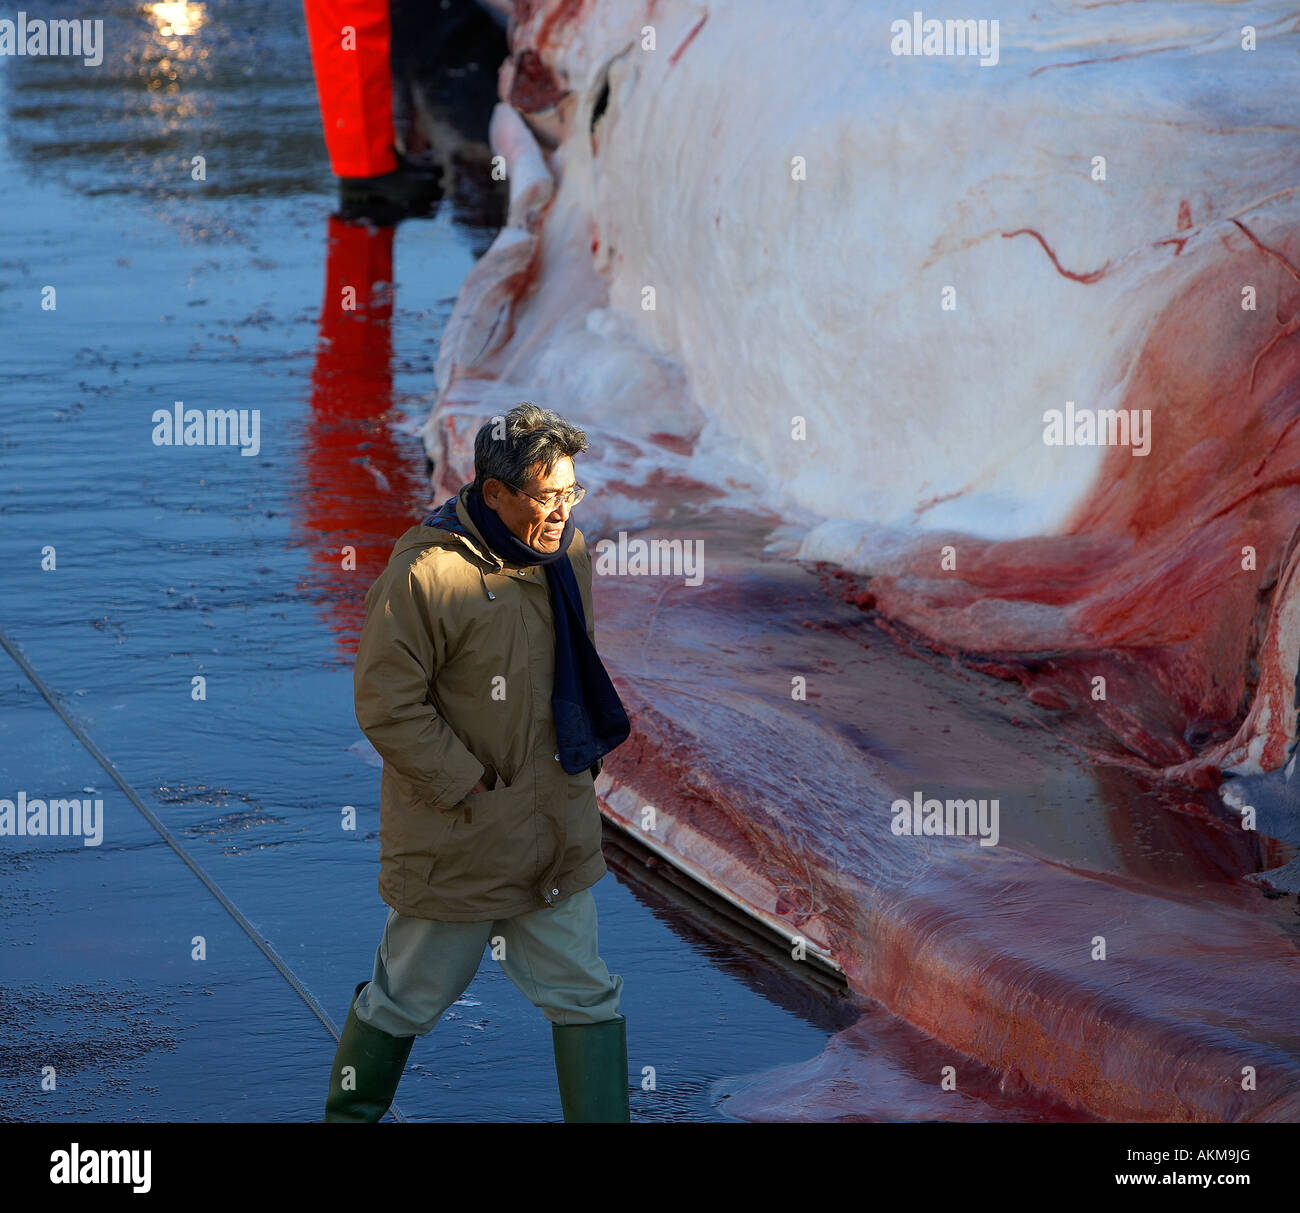 Potential buyer of hunted fin whale Stock Photo